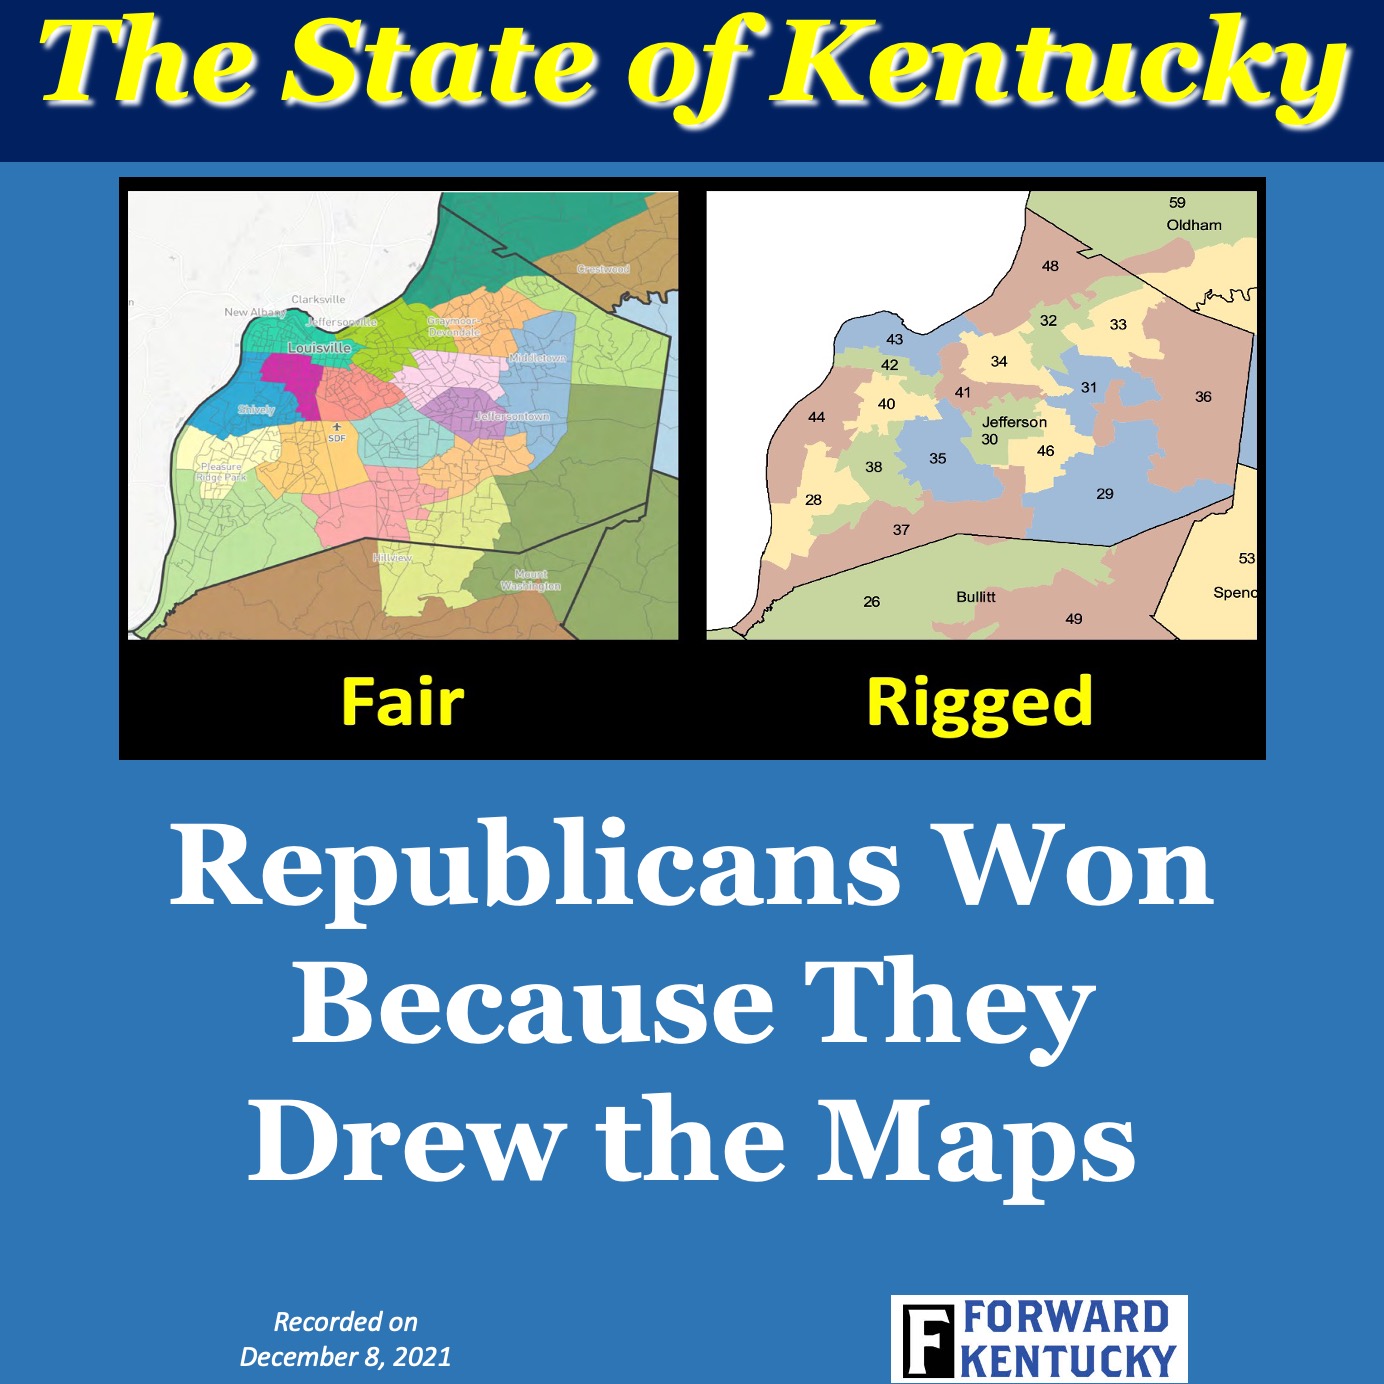 The Republicans won because they drew the maps